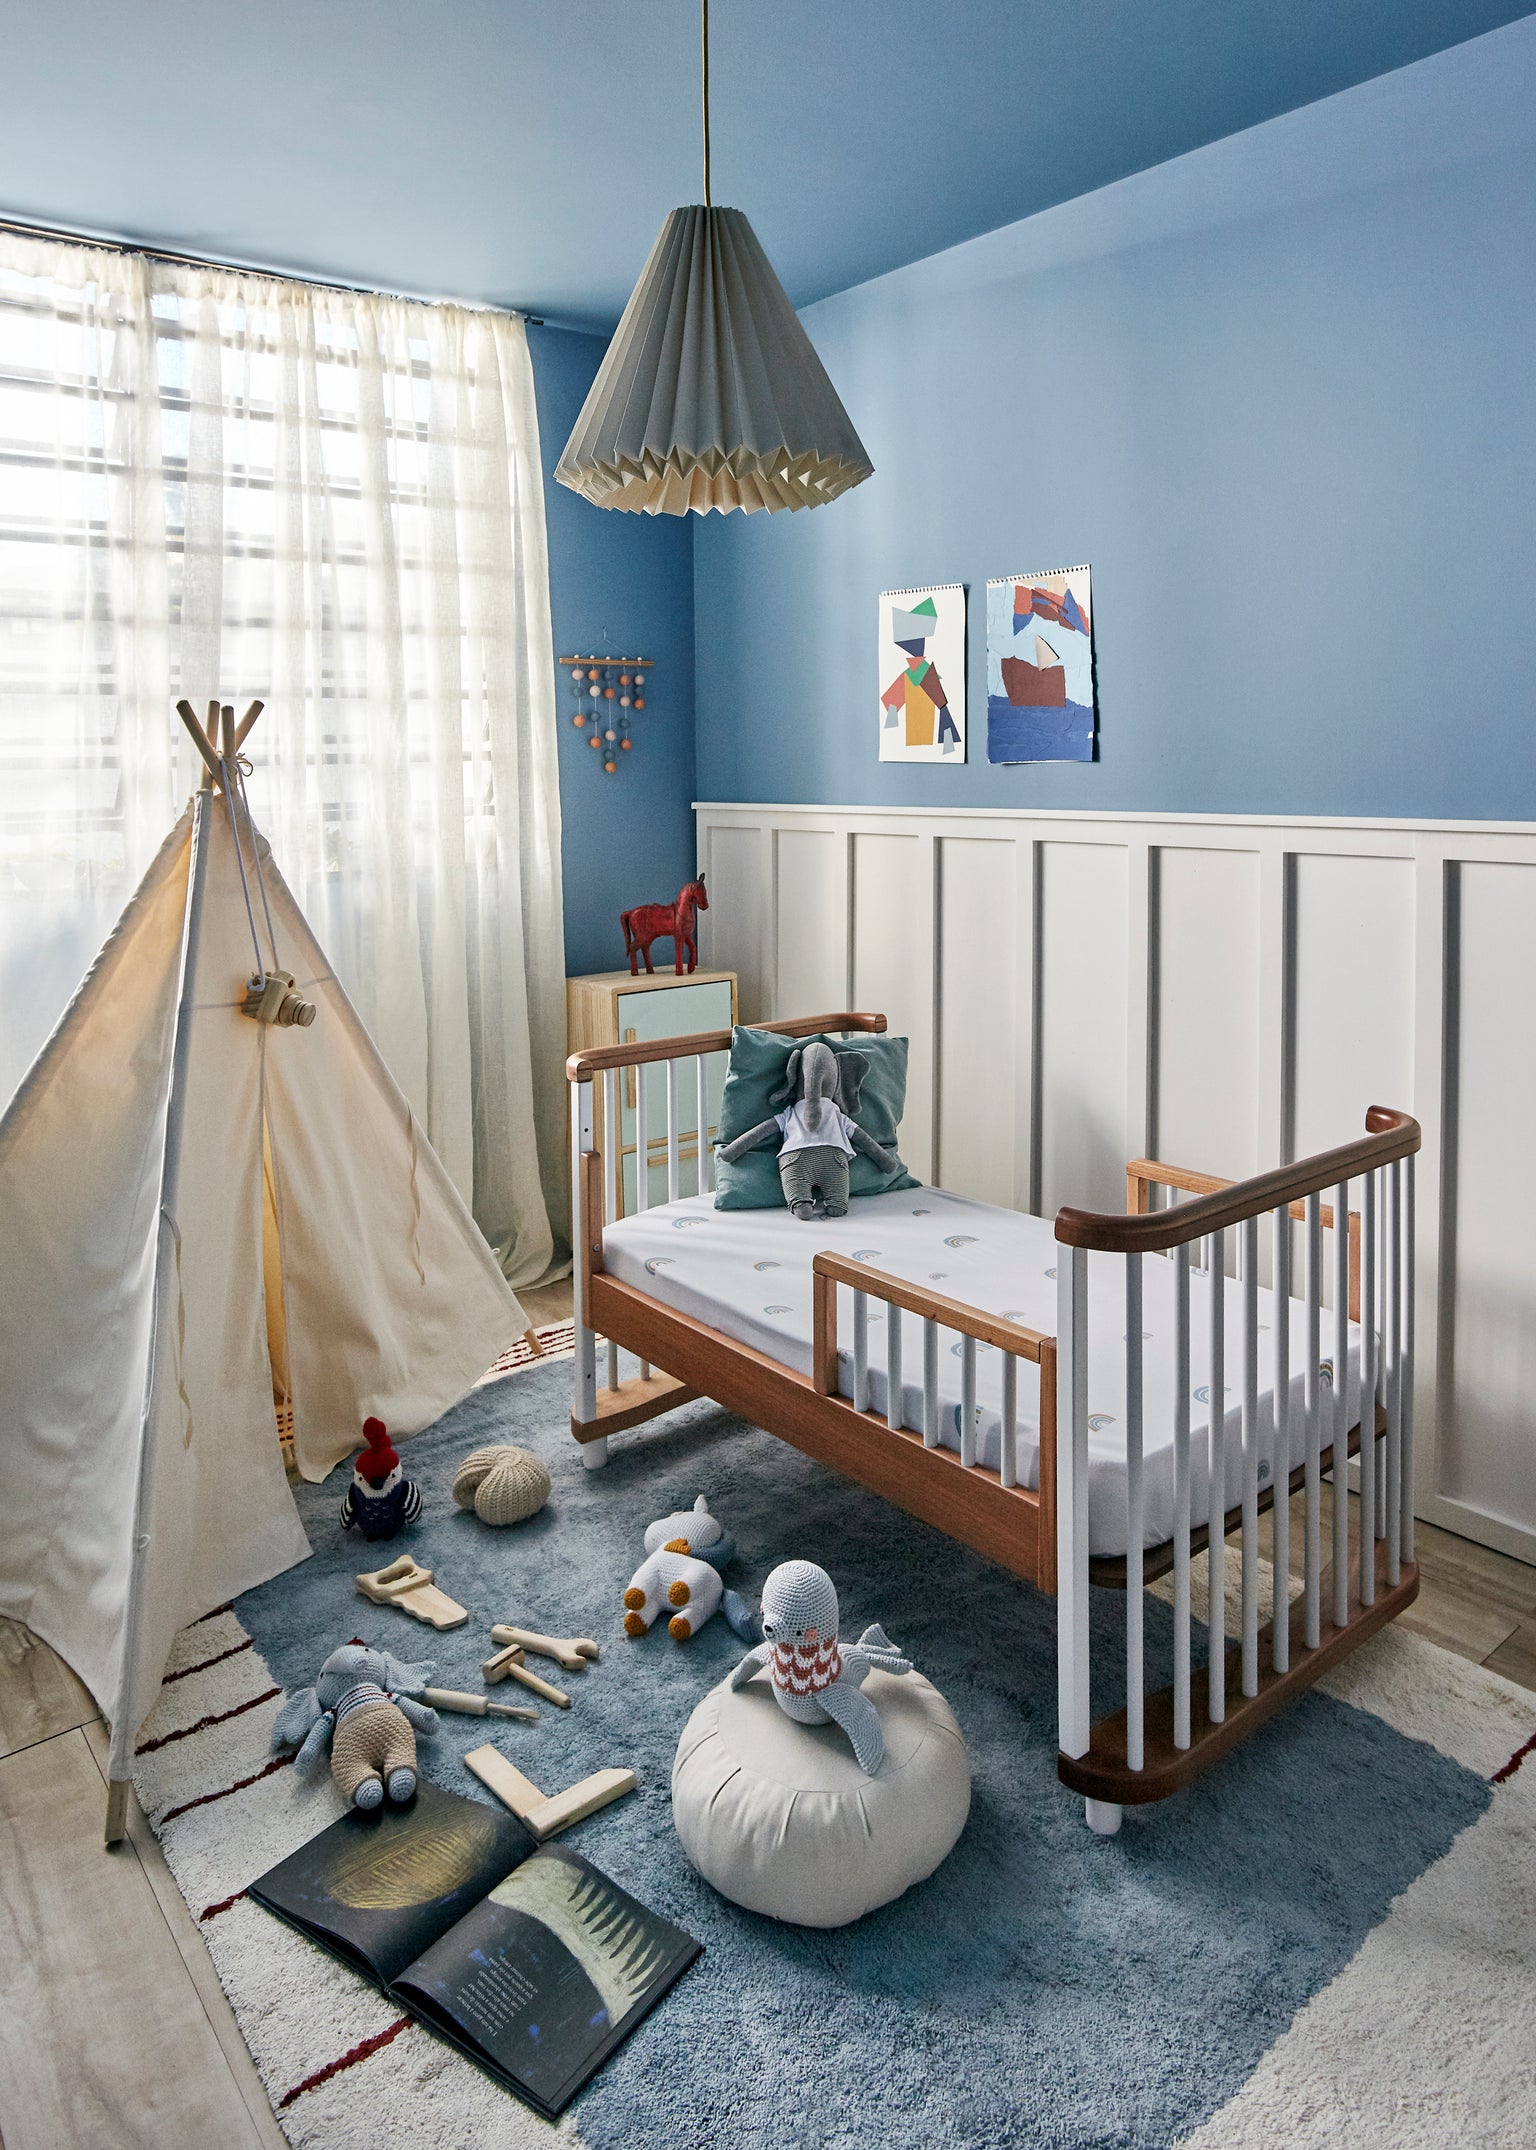 Wintry Touches to Add to Baby's Nursery